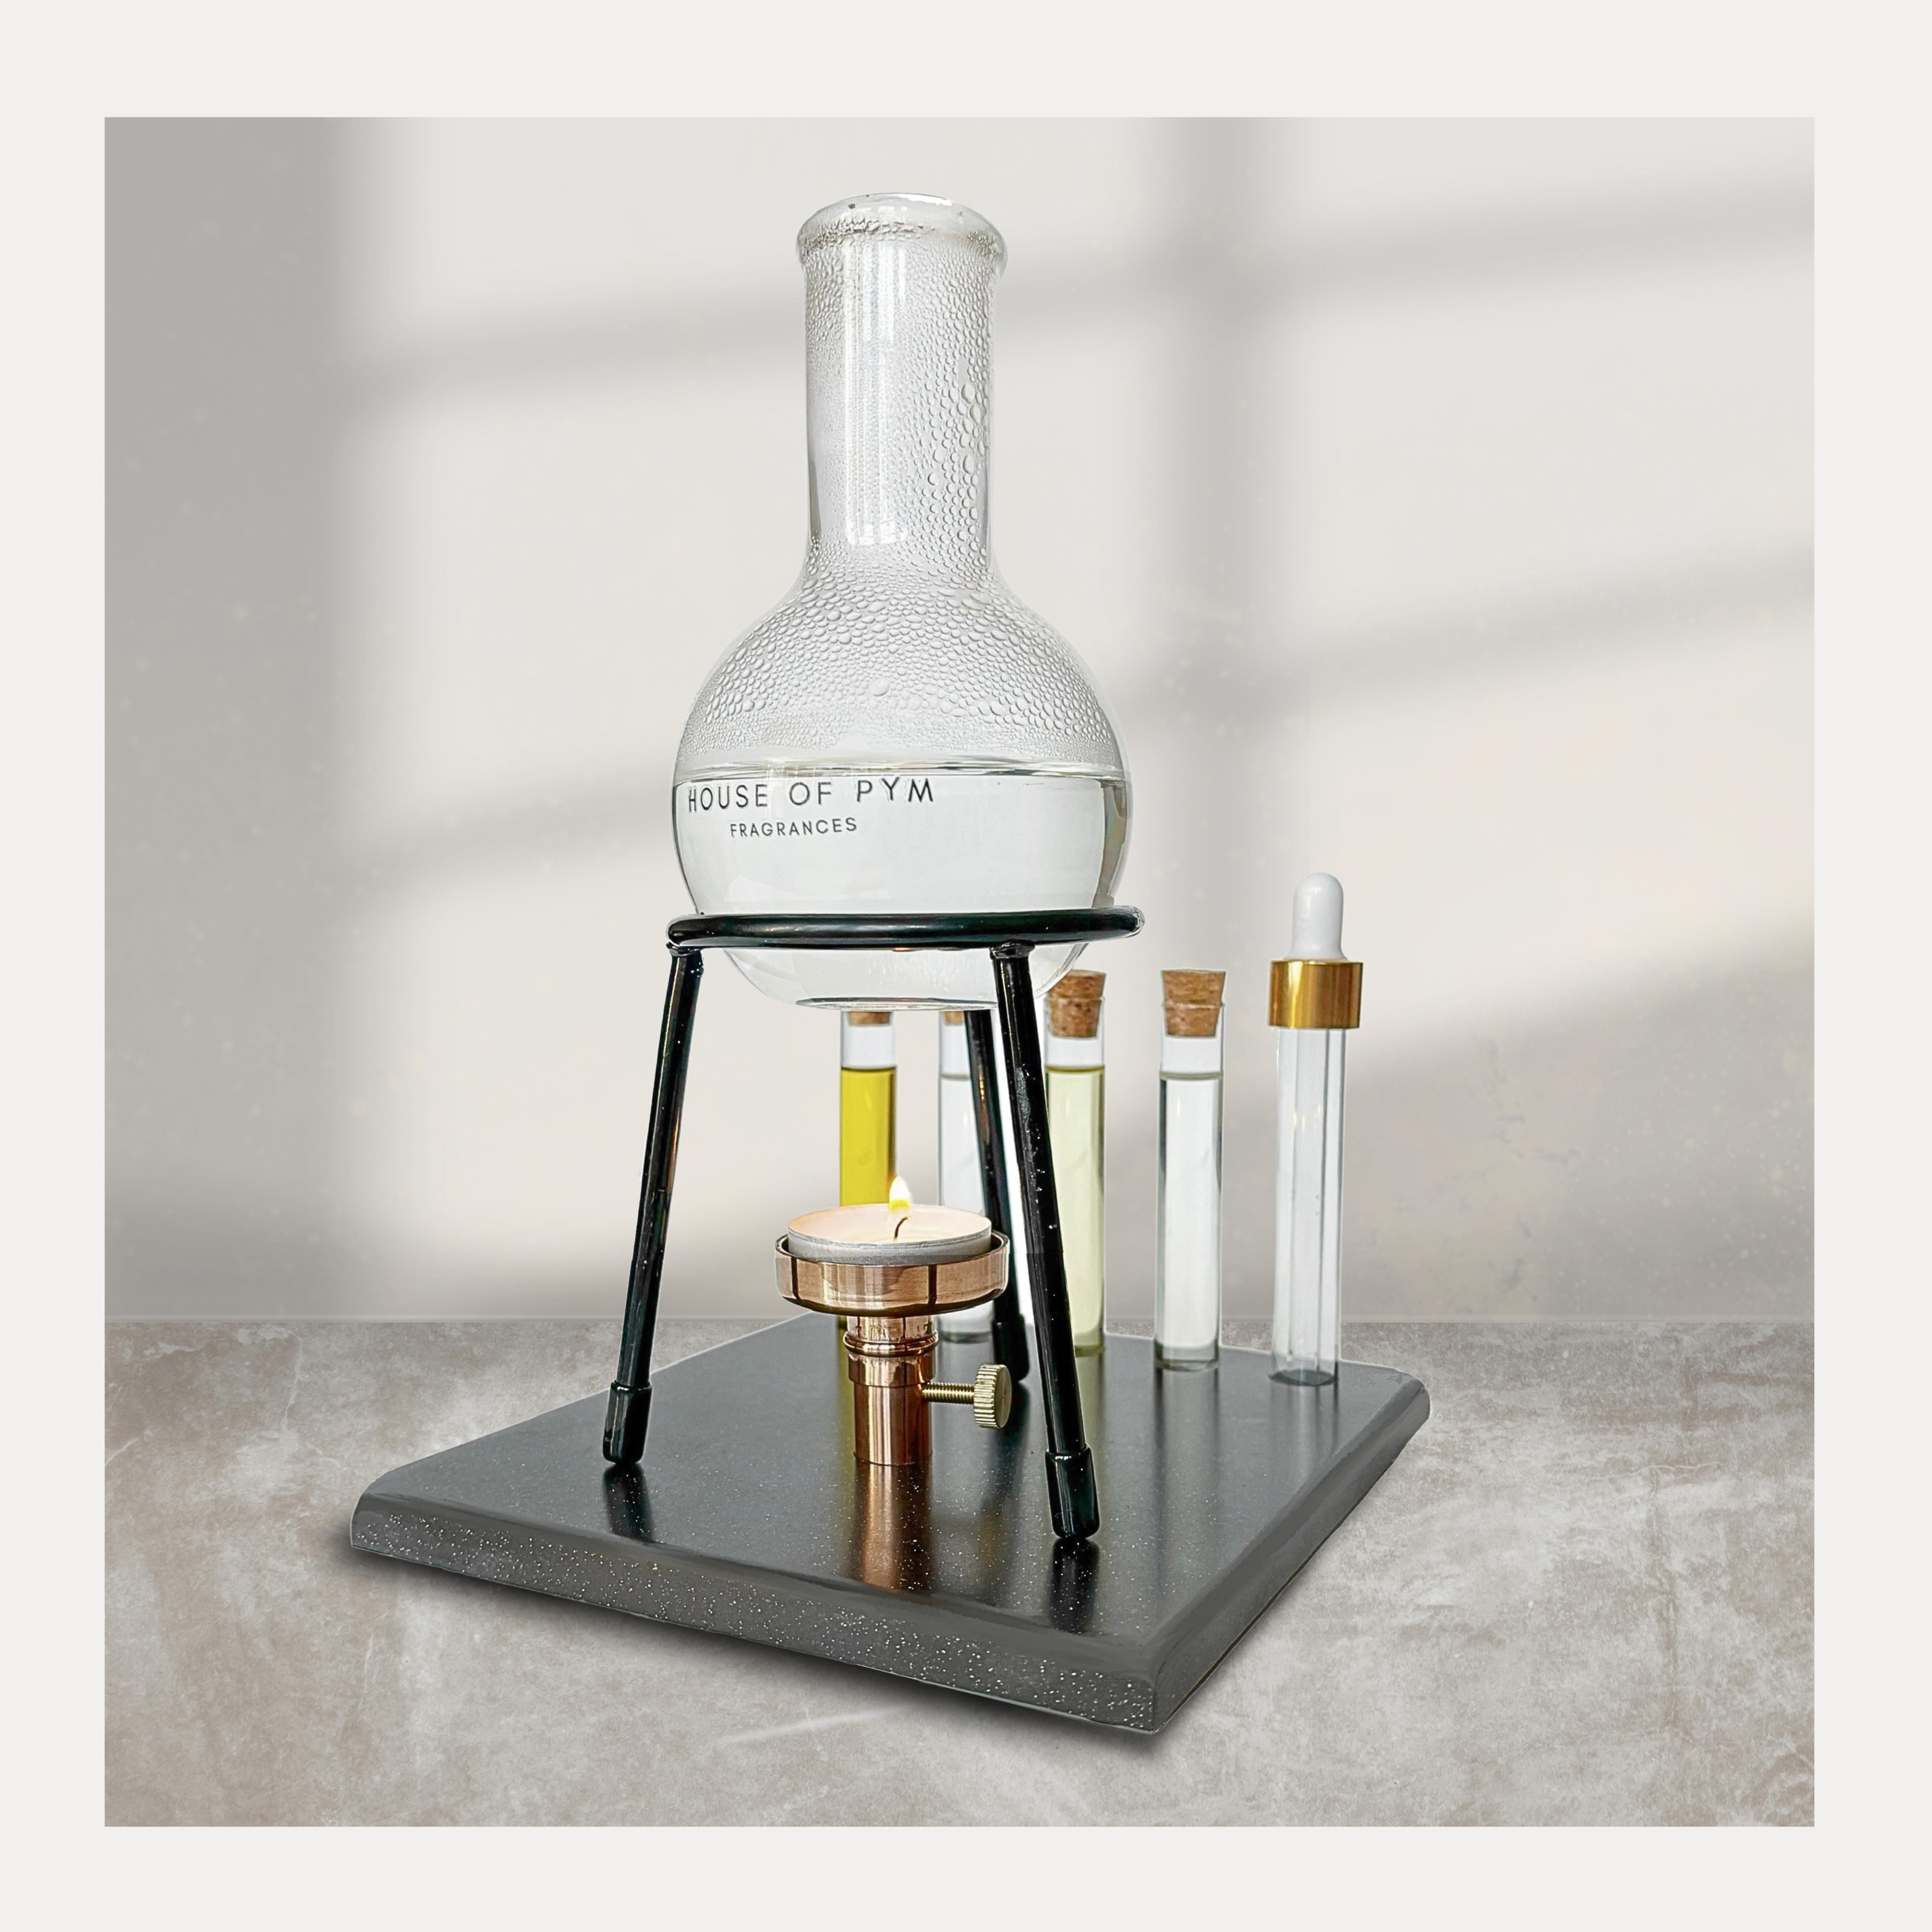 Our exquisite Essential Oil Burner - a captivating fusion of elegance and aromatherapy designed to elevate your sensory experience.
Crafted with precision, our burner seamlessly blends functionality with a nostalgic ‘School Days’ aesthetic